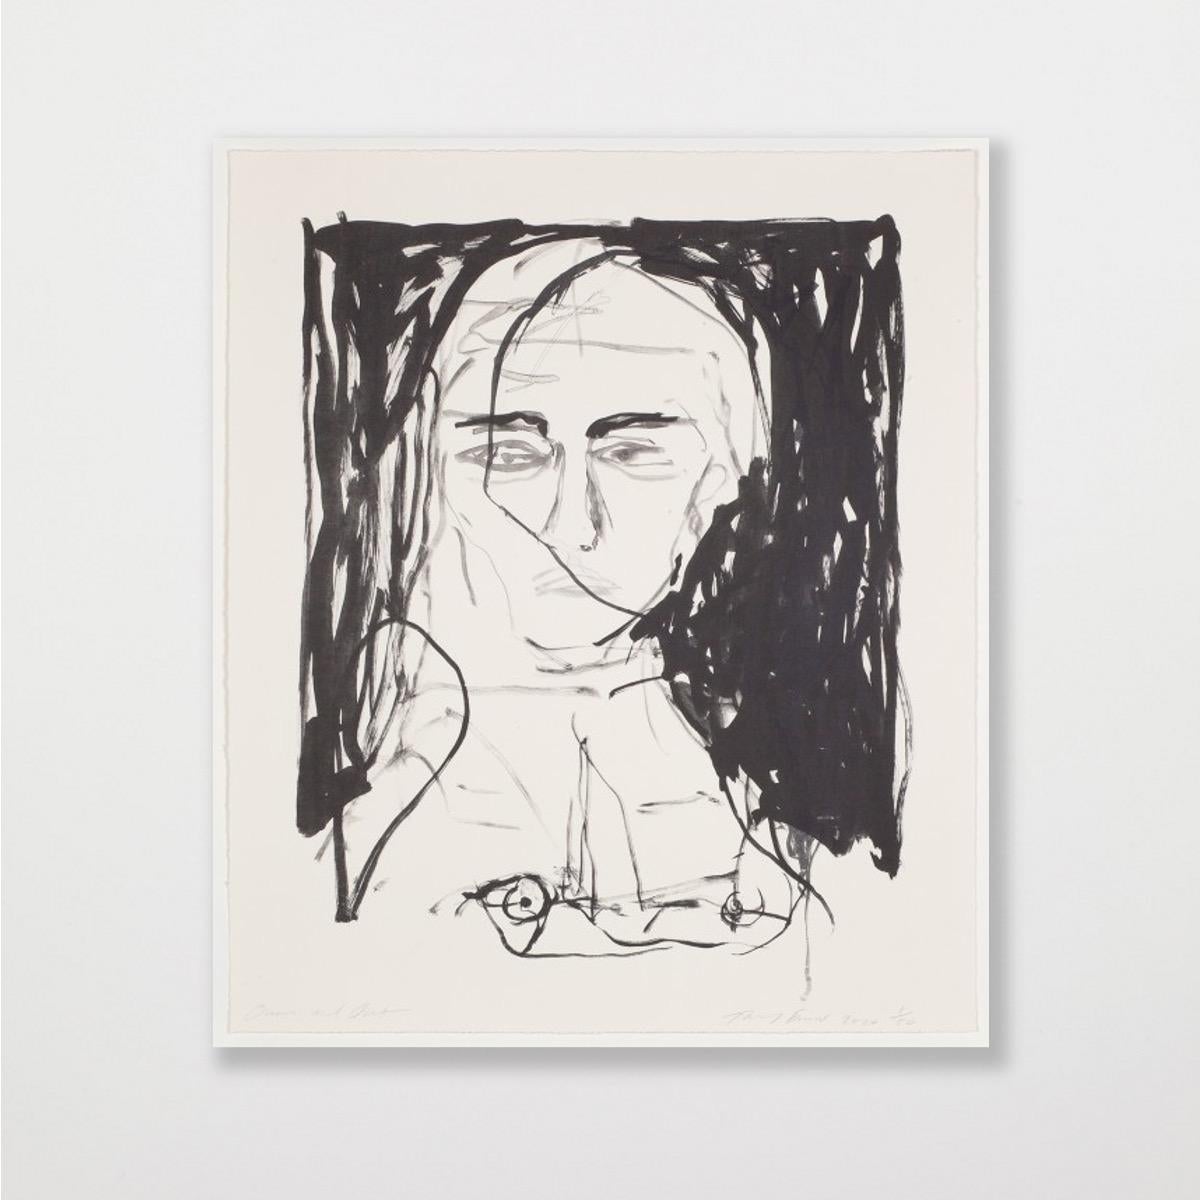 Over and Out - Emin, Contemporary, YBAs, Lithograph, Black, Portrait
2 colour lithograph on Somerset Velvet Warm White 400gsm
Edition of 50
65,5 x 55,5 cm (25.8 x 21.9 in)
Signed, numbered, and dated by the artist
In mint condition
With certificate